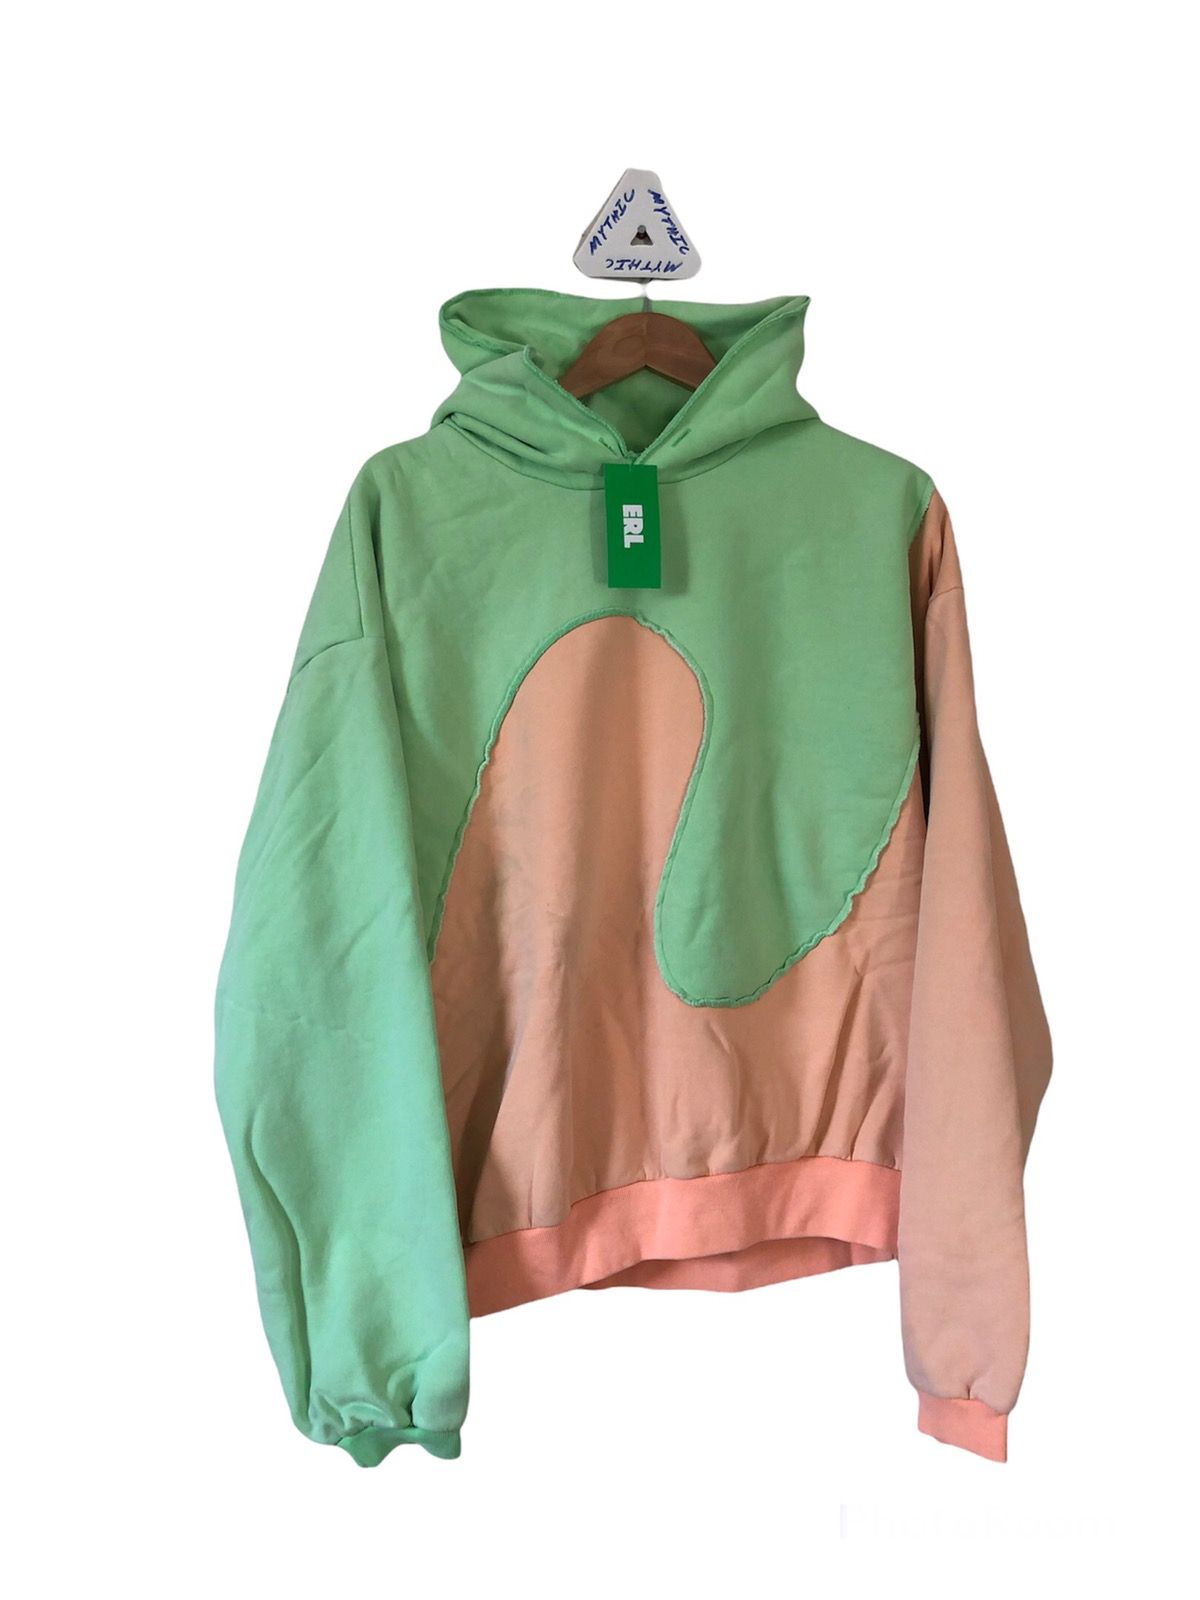 ERL ERL Swirl Hoodie Size US L / EU 52-54 / 3 - 1 Preview